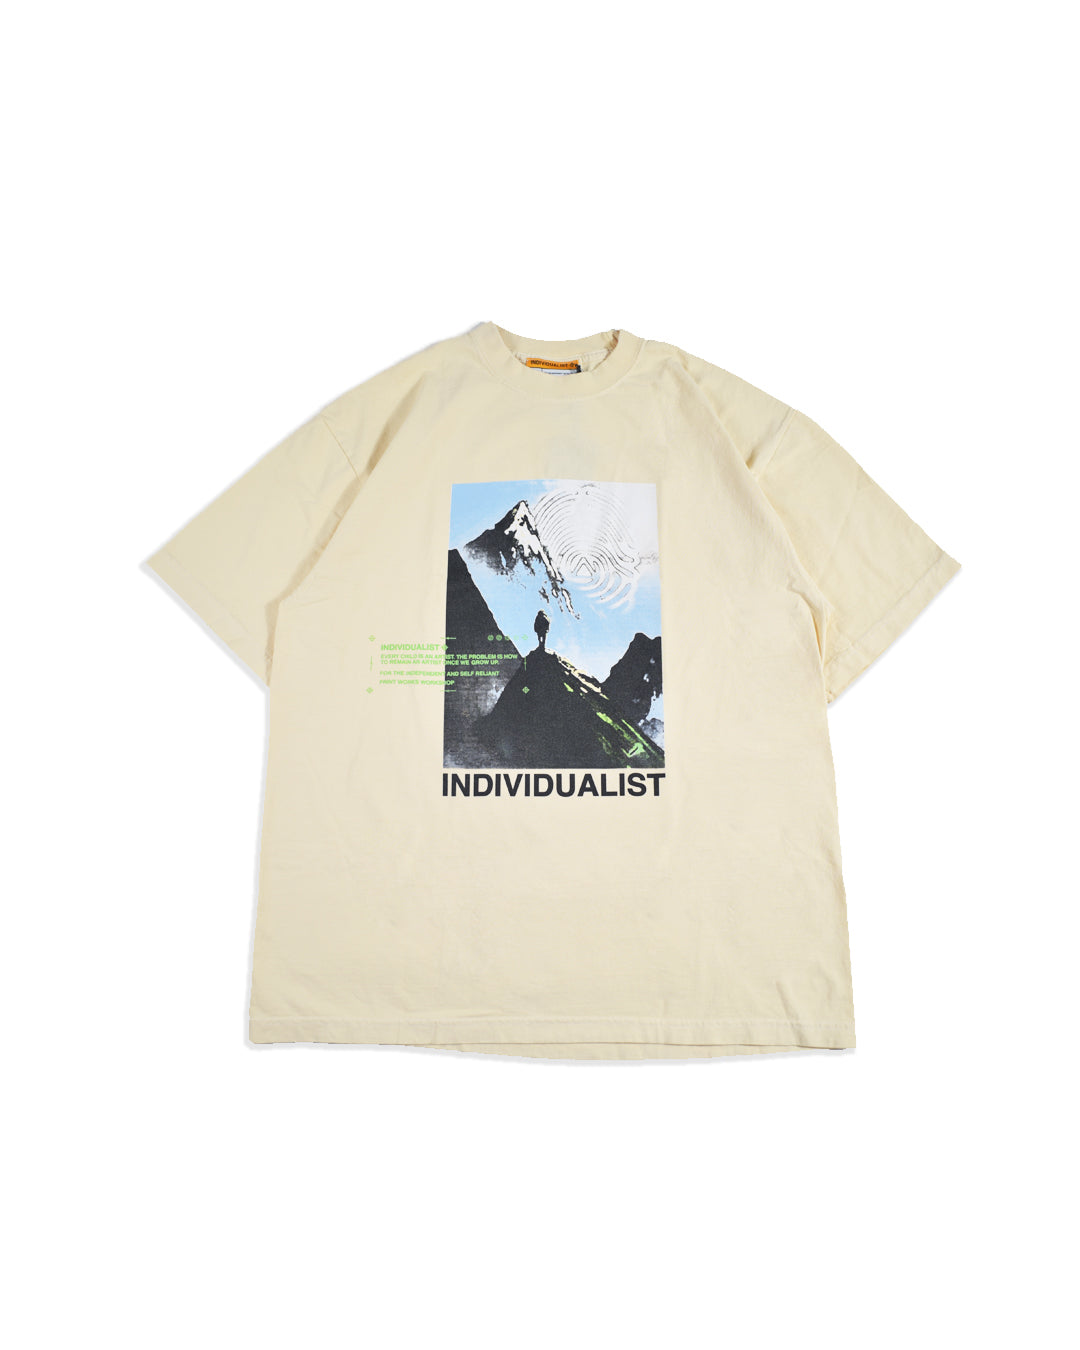 Solo Mission Tee